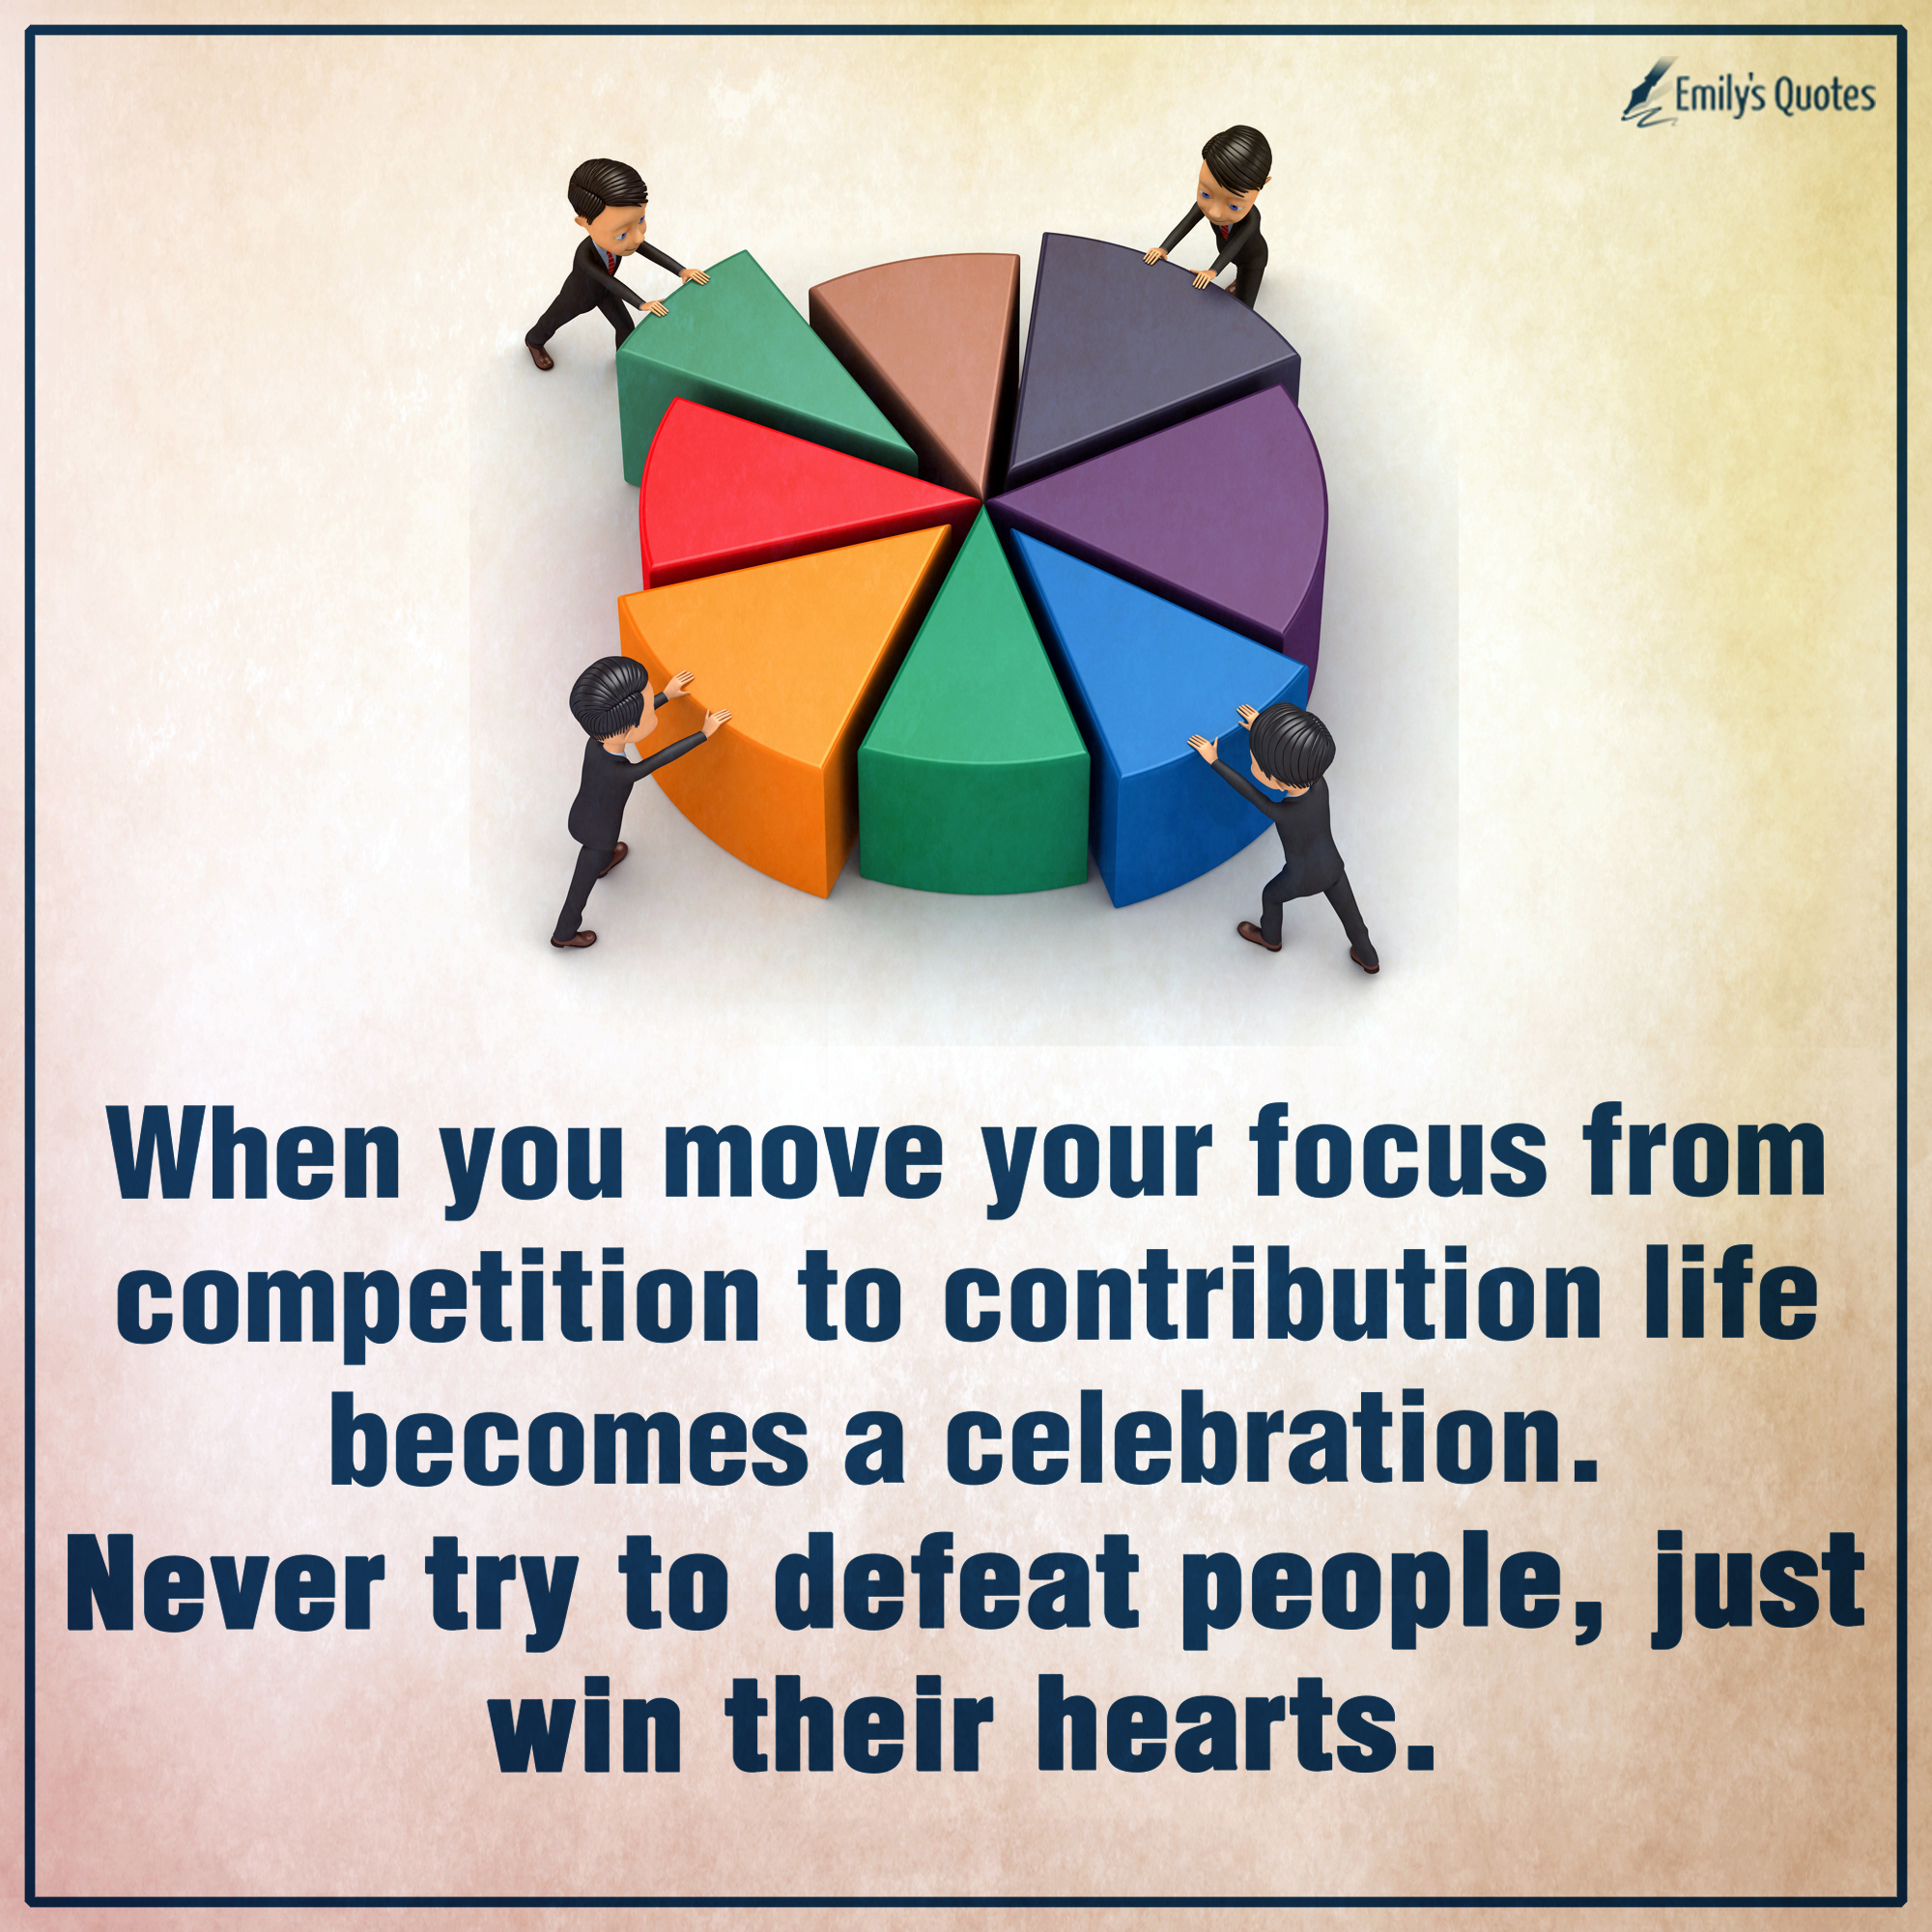 When you move your focus from competition to contribution life becomes a celebration. Never